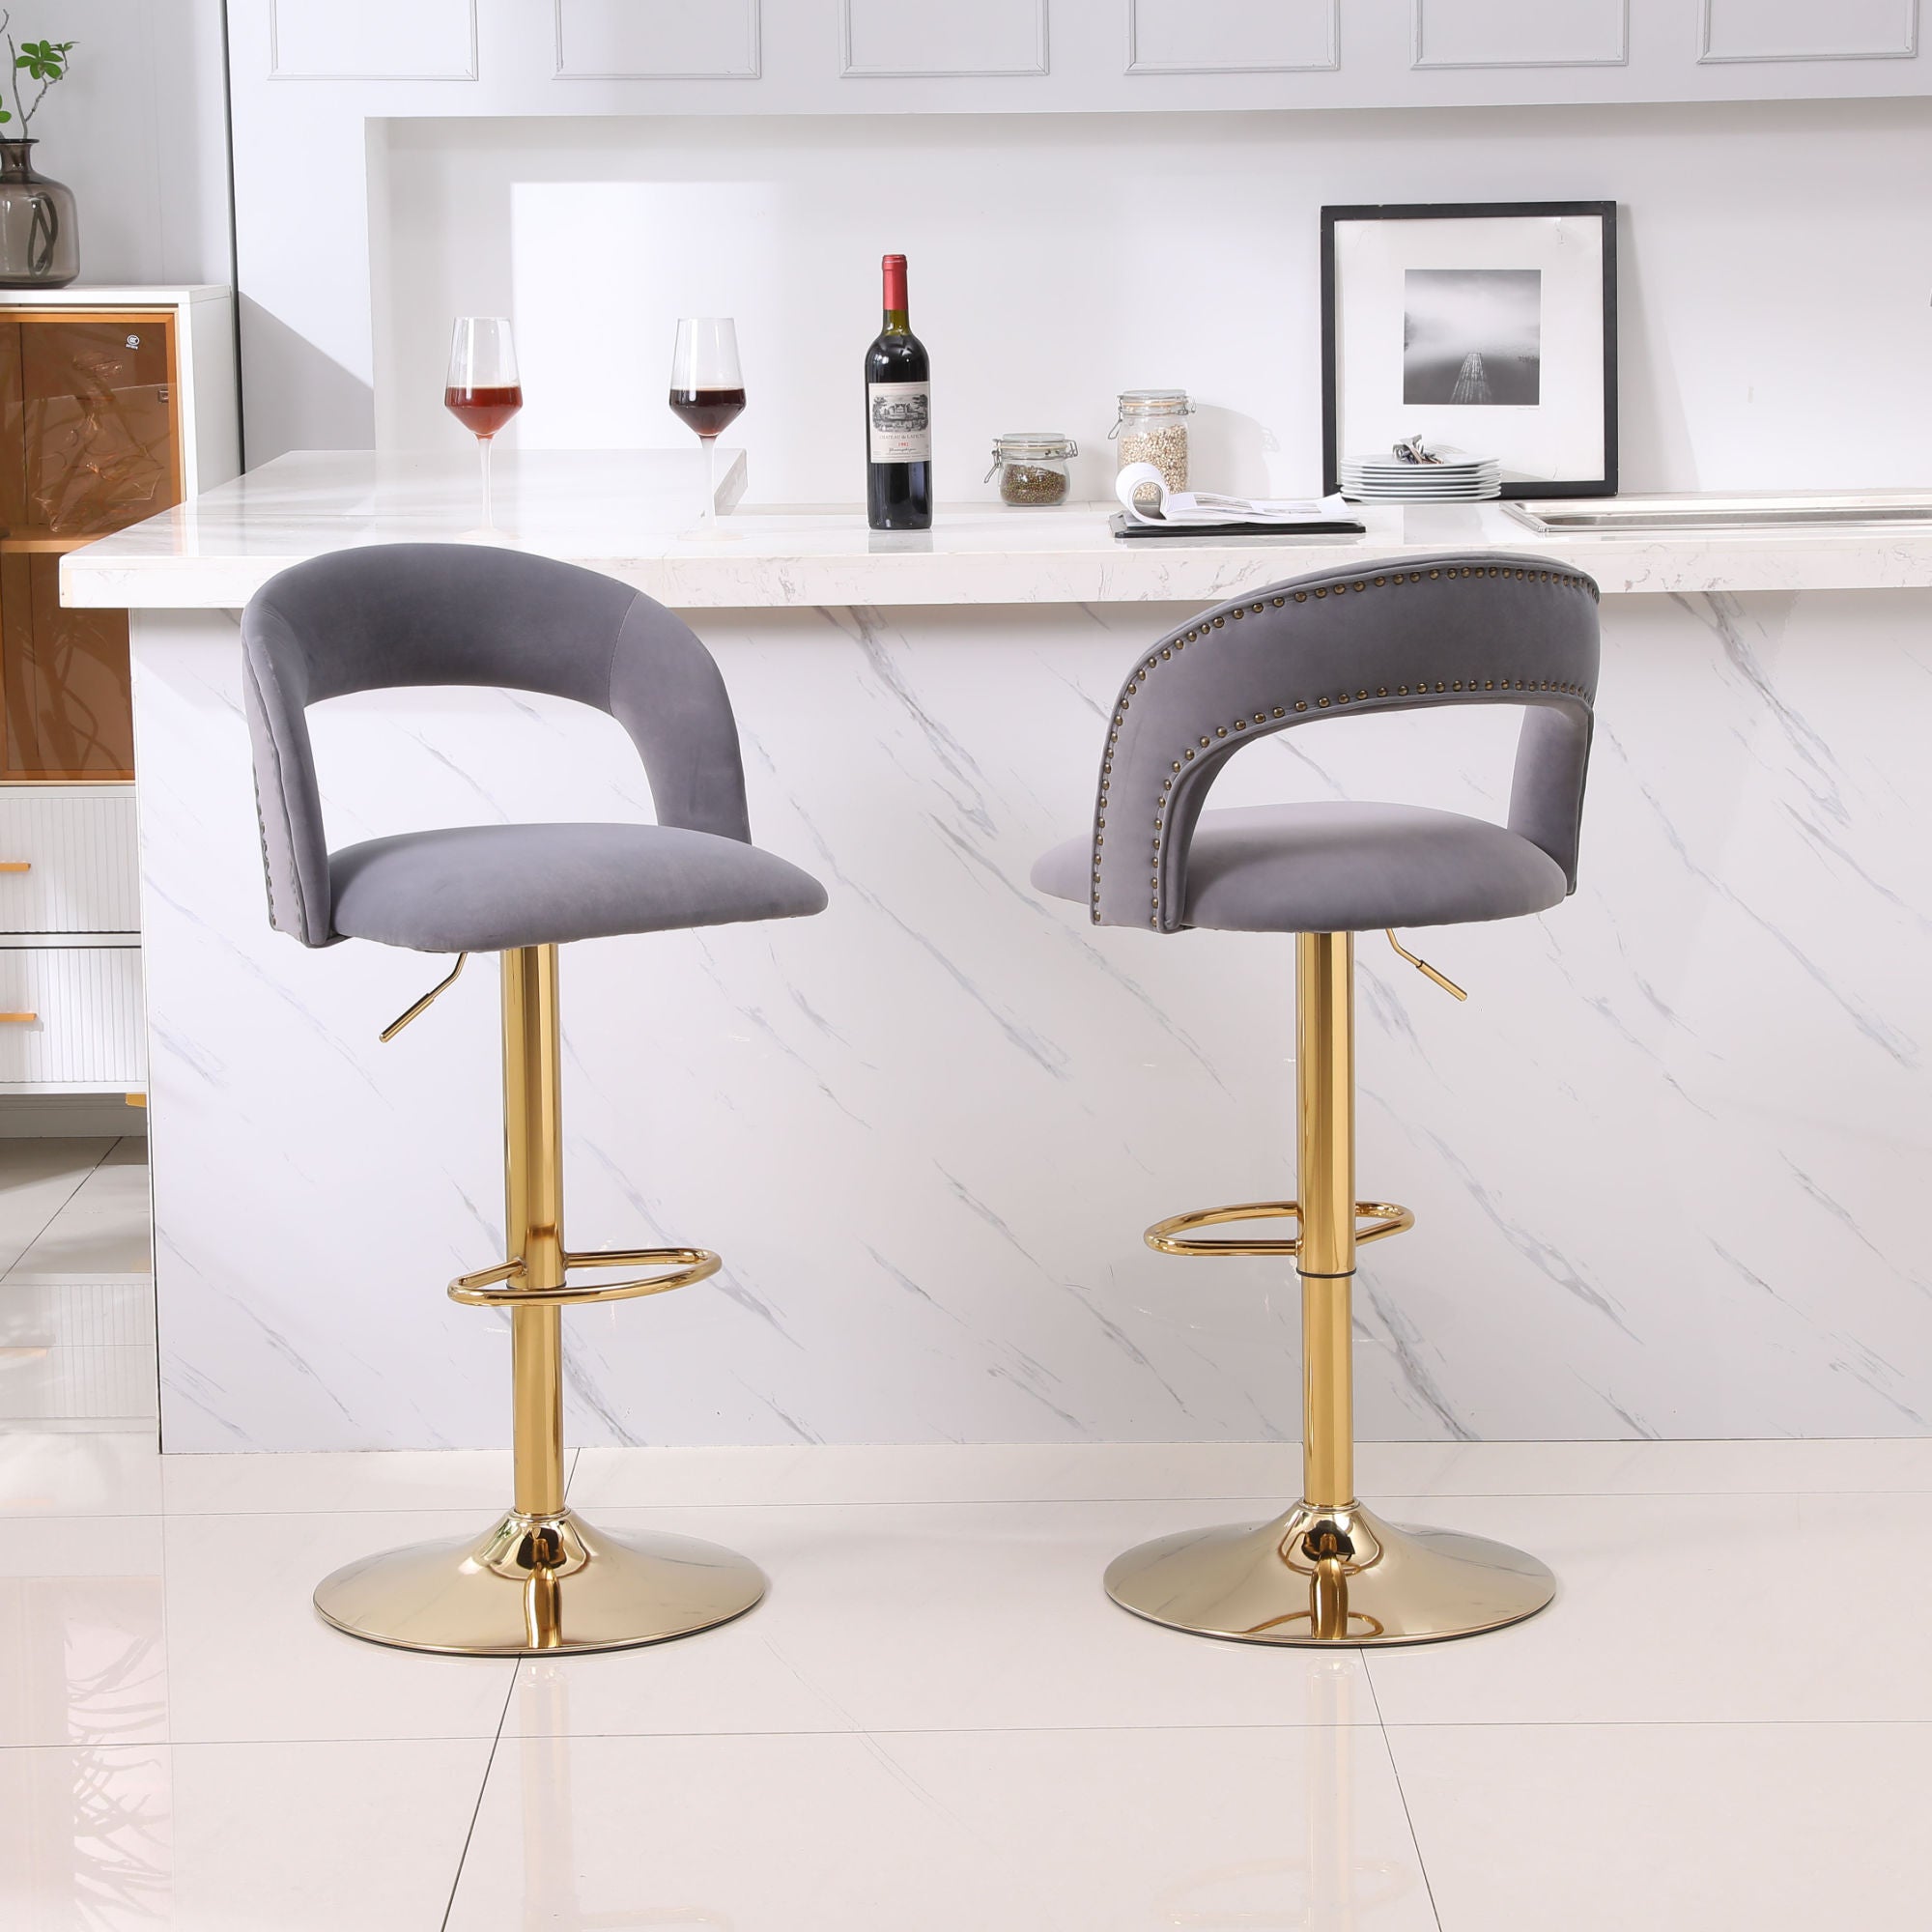 Set of 2 of Oasis Chair